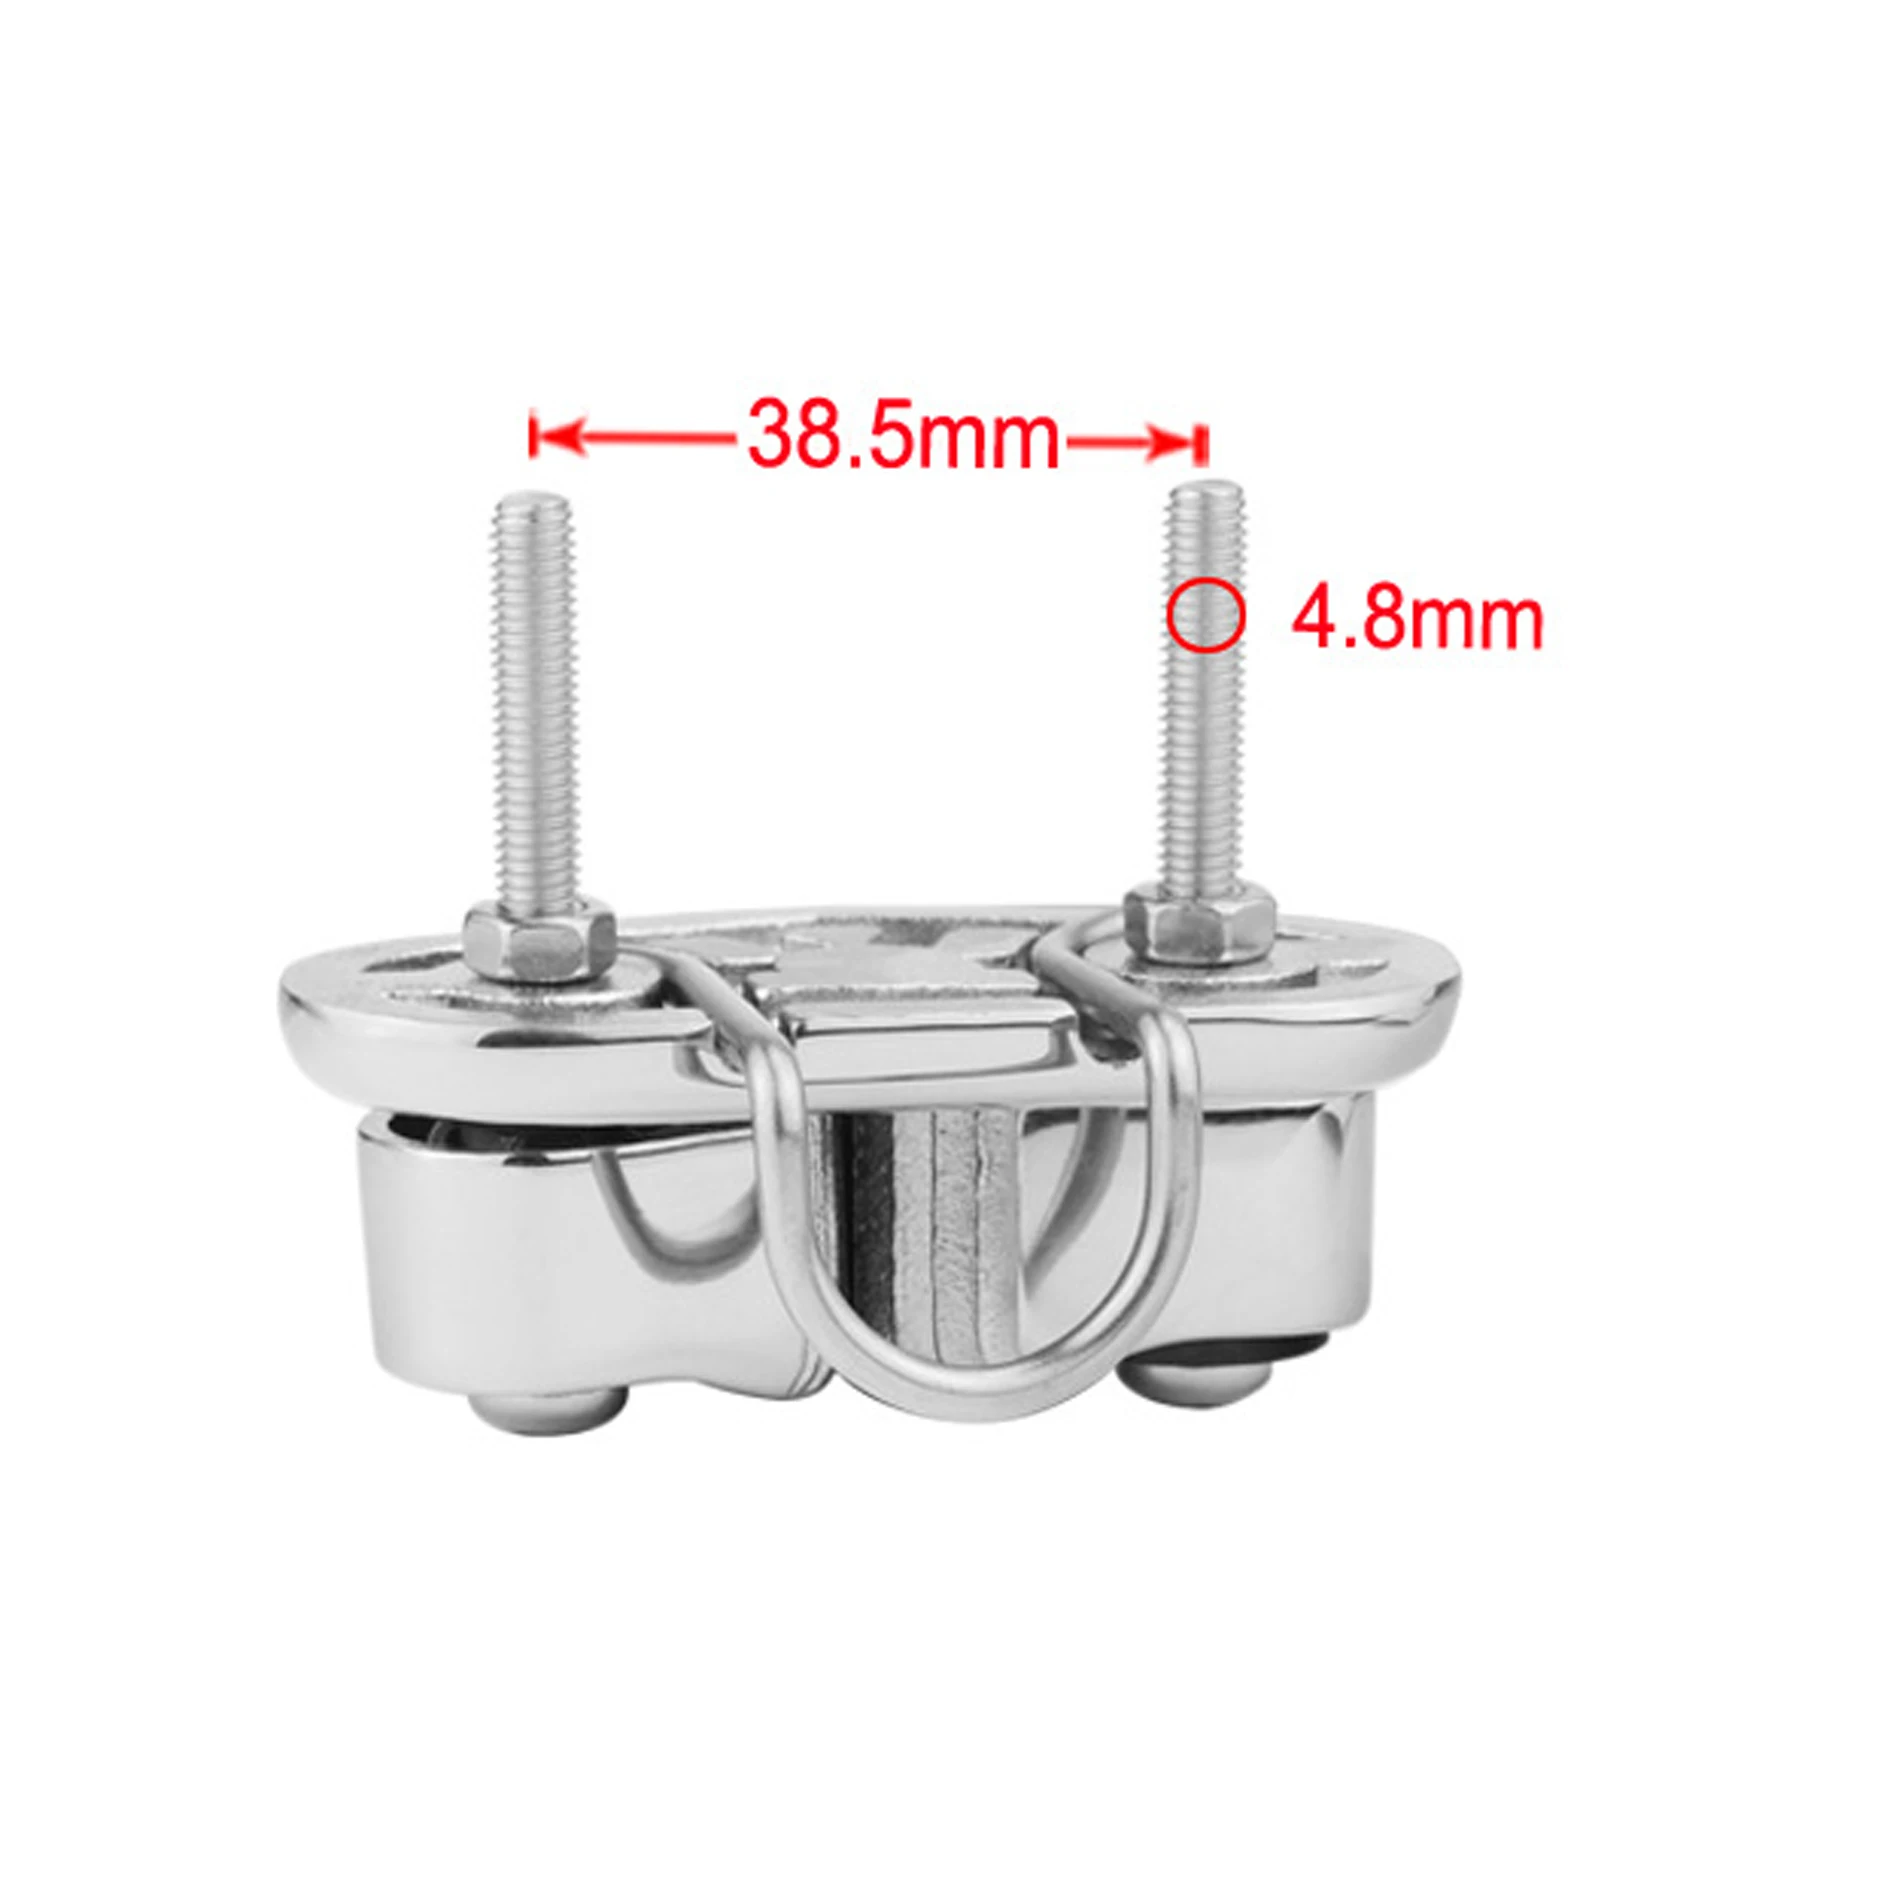 Stainless Steel 316 Cam Cleat with Wire Leading Ring Boat Cam Cleats Matic Fairlead Marine Sailing Sailboat Kayak Canoe Dinghy enlarge